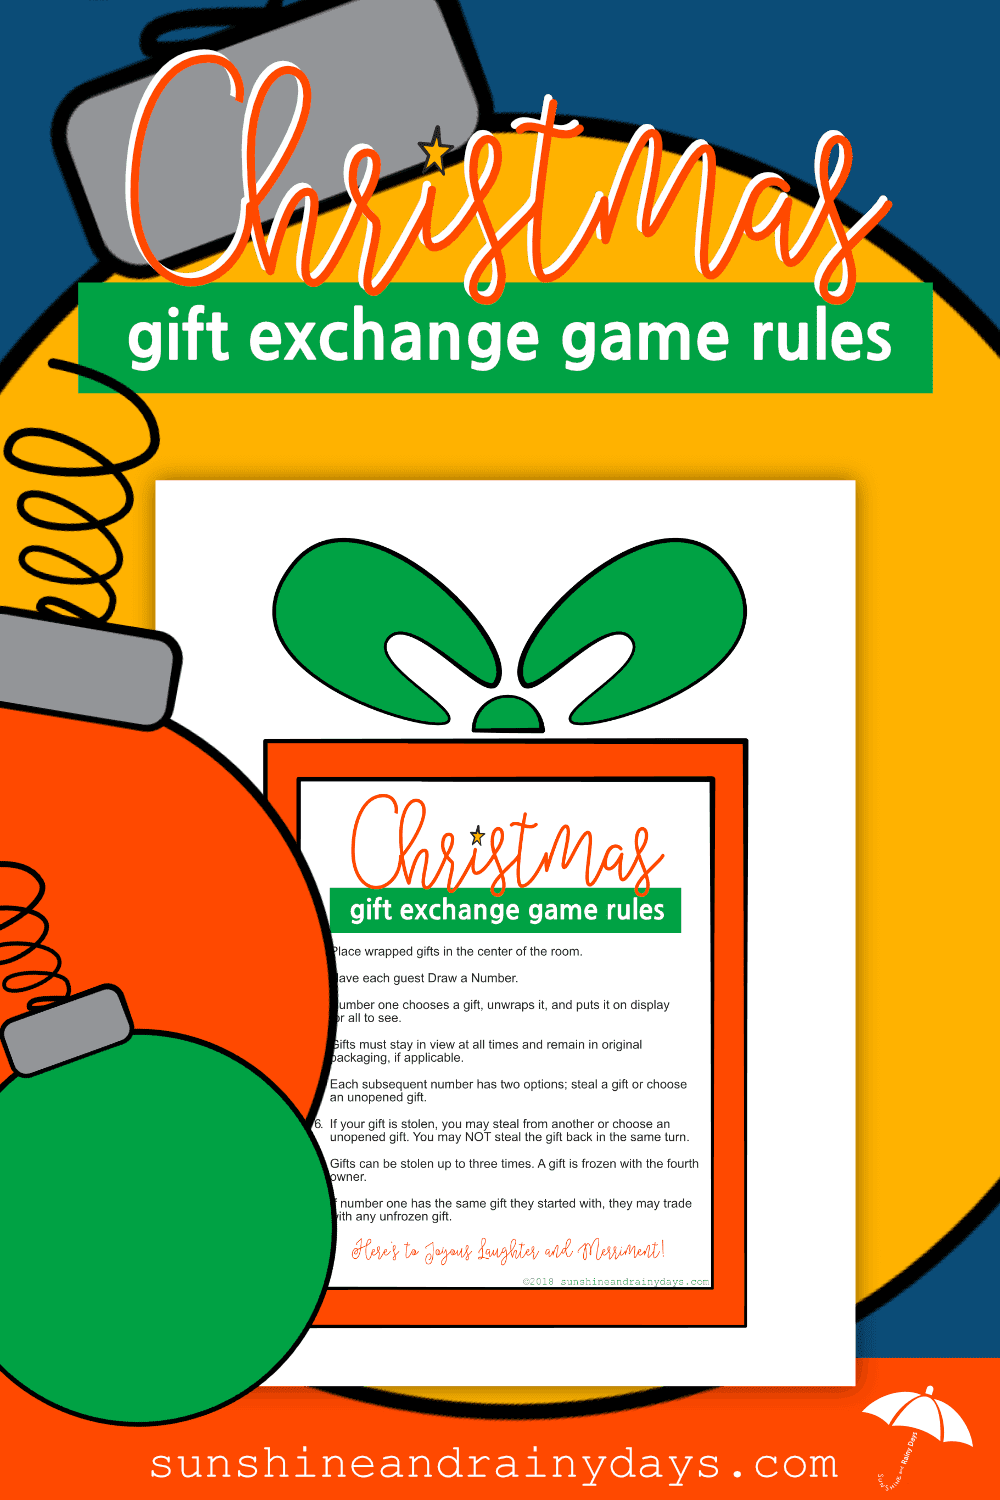 Pass the Present / Gift Game Digital - Etsy | Christmas gift games, Christmas  gift exchange games, Christmas party games